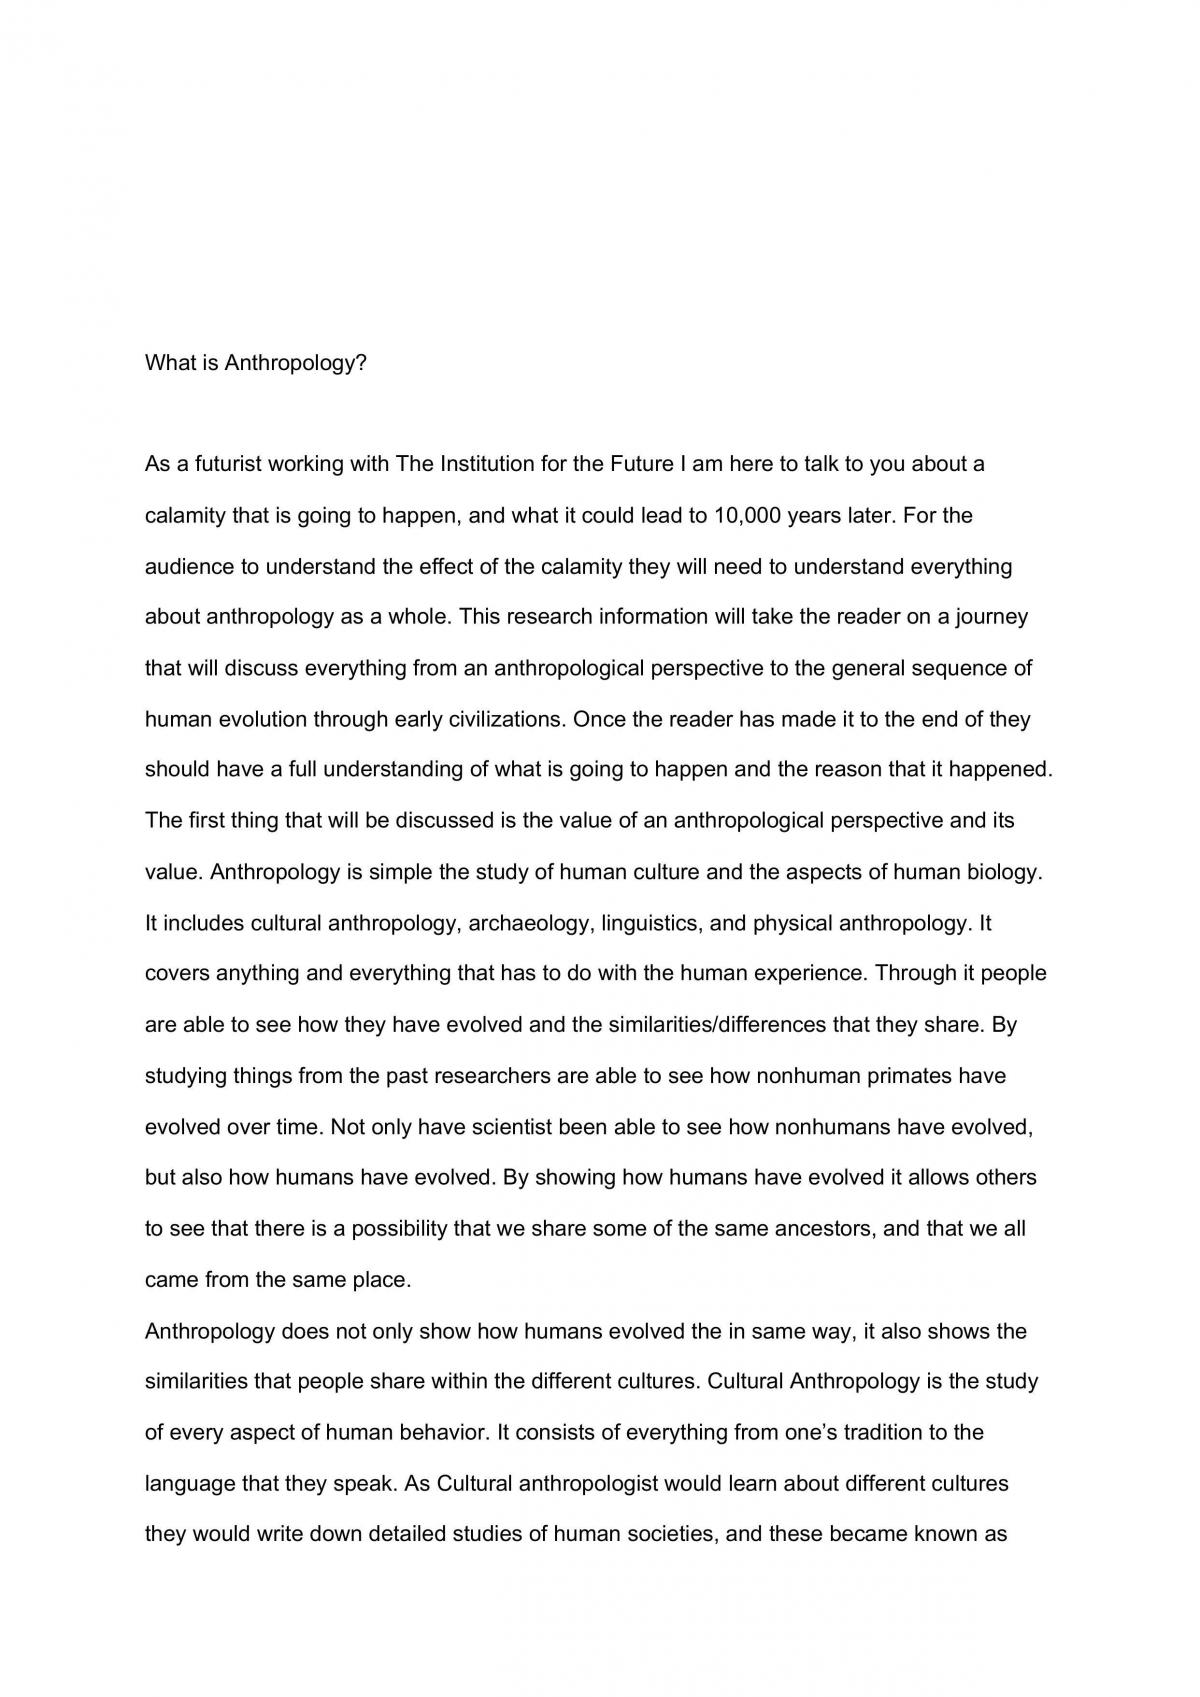 What is Anthropology - Page 1